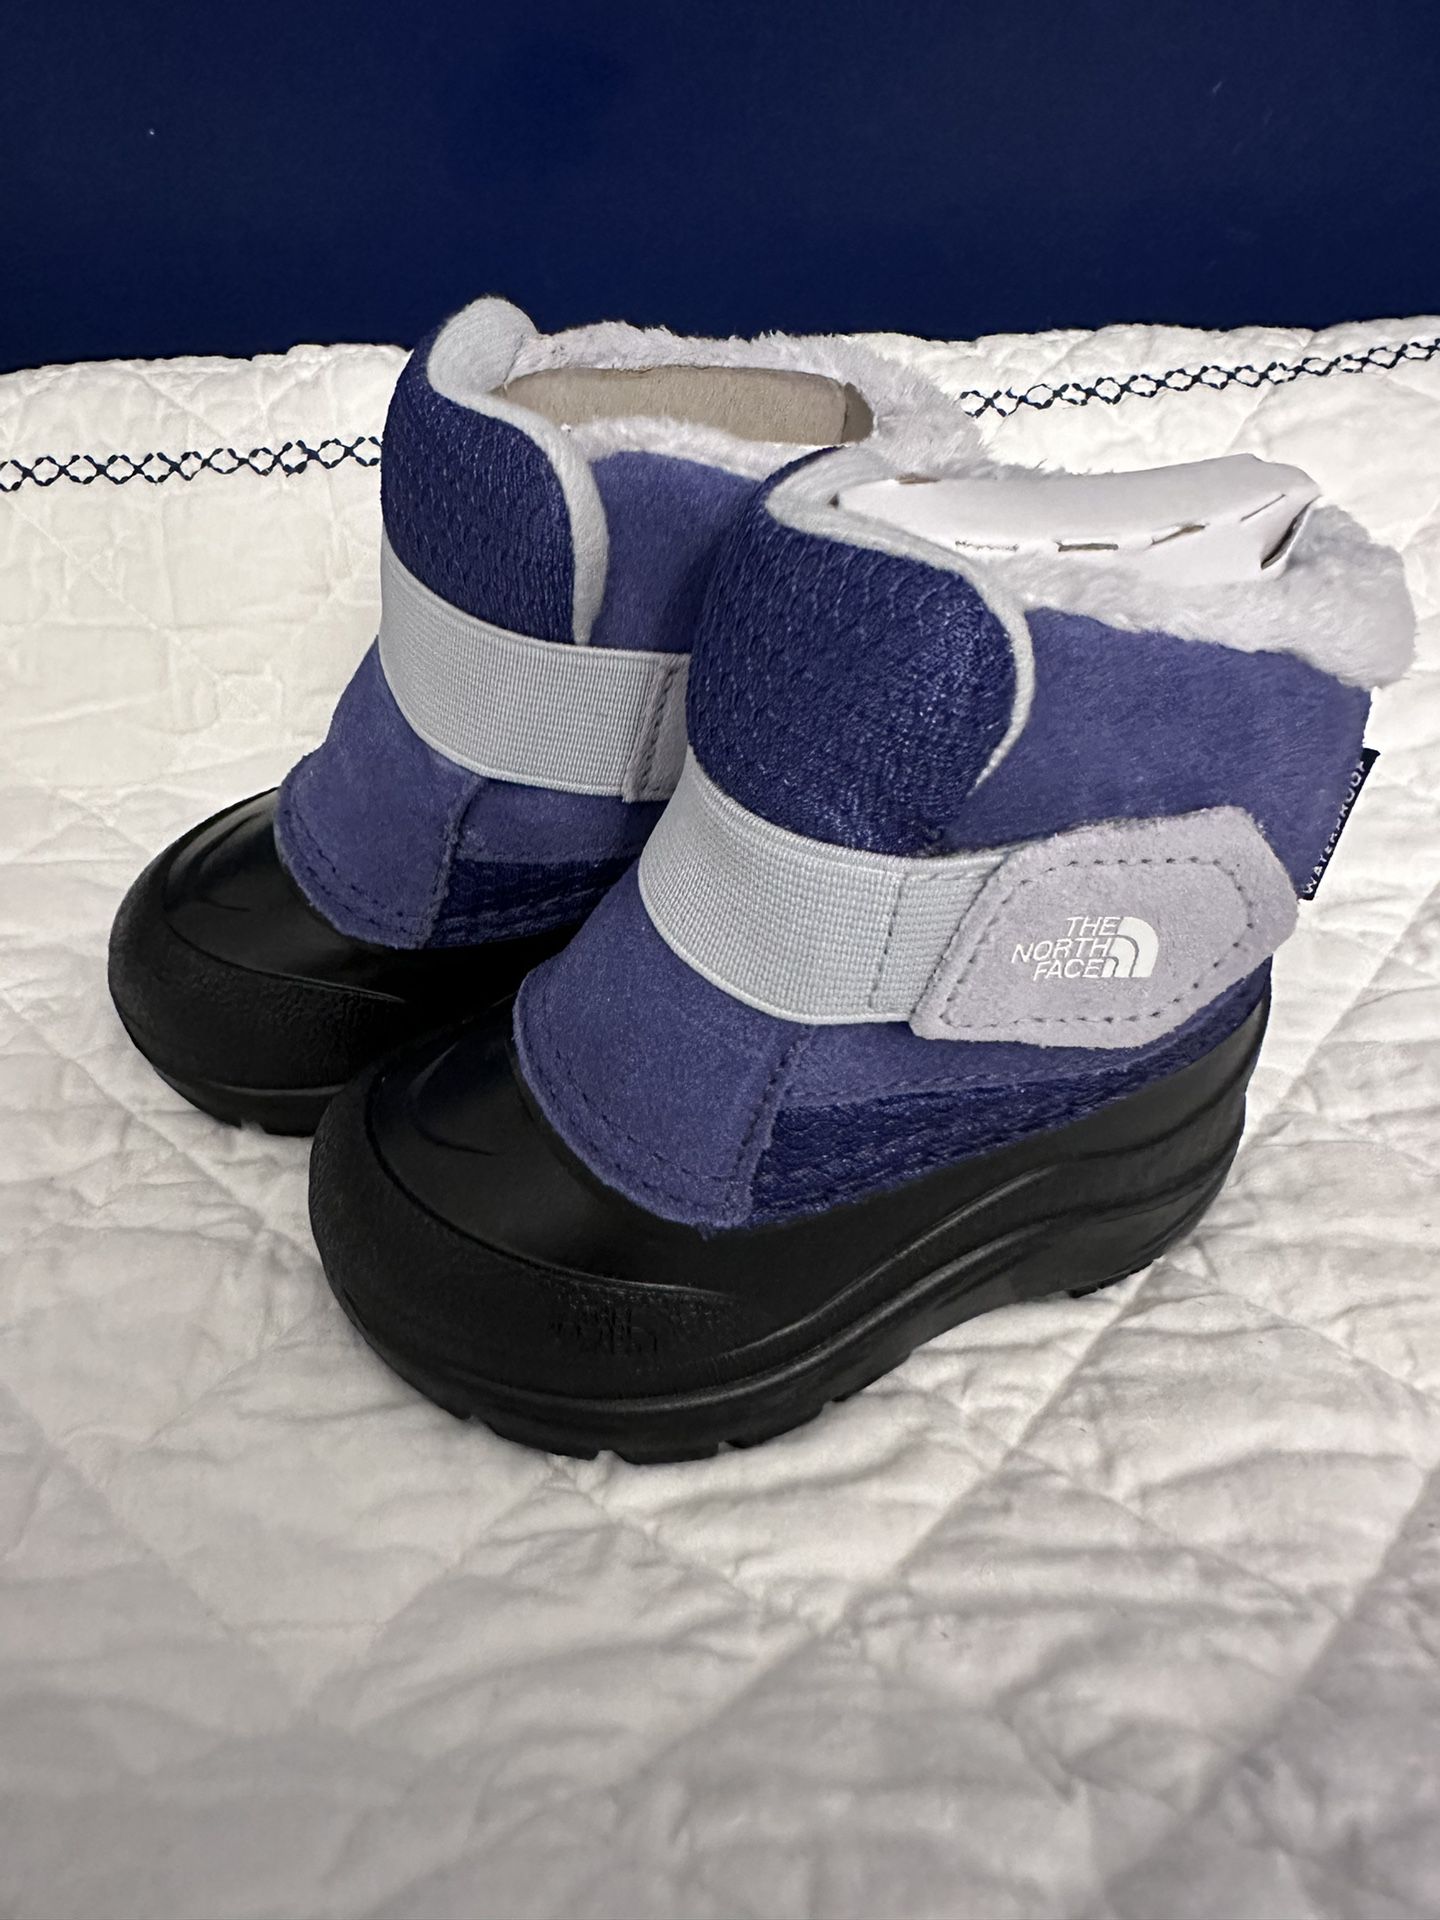 The North Face Kids Snow Boots